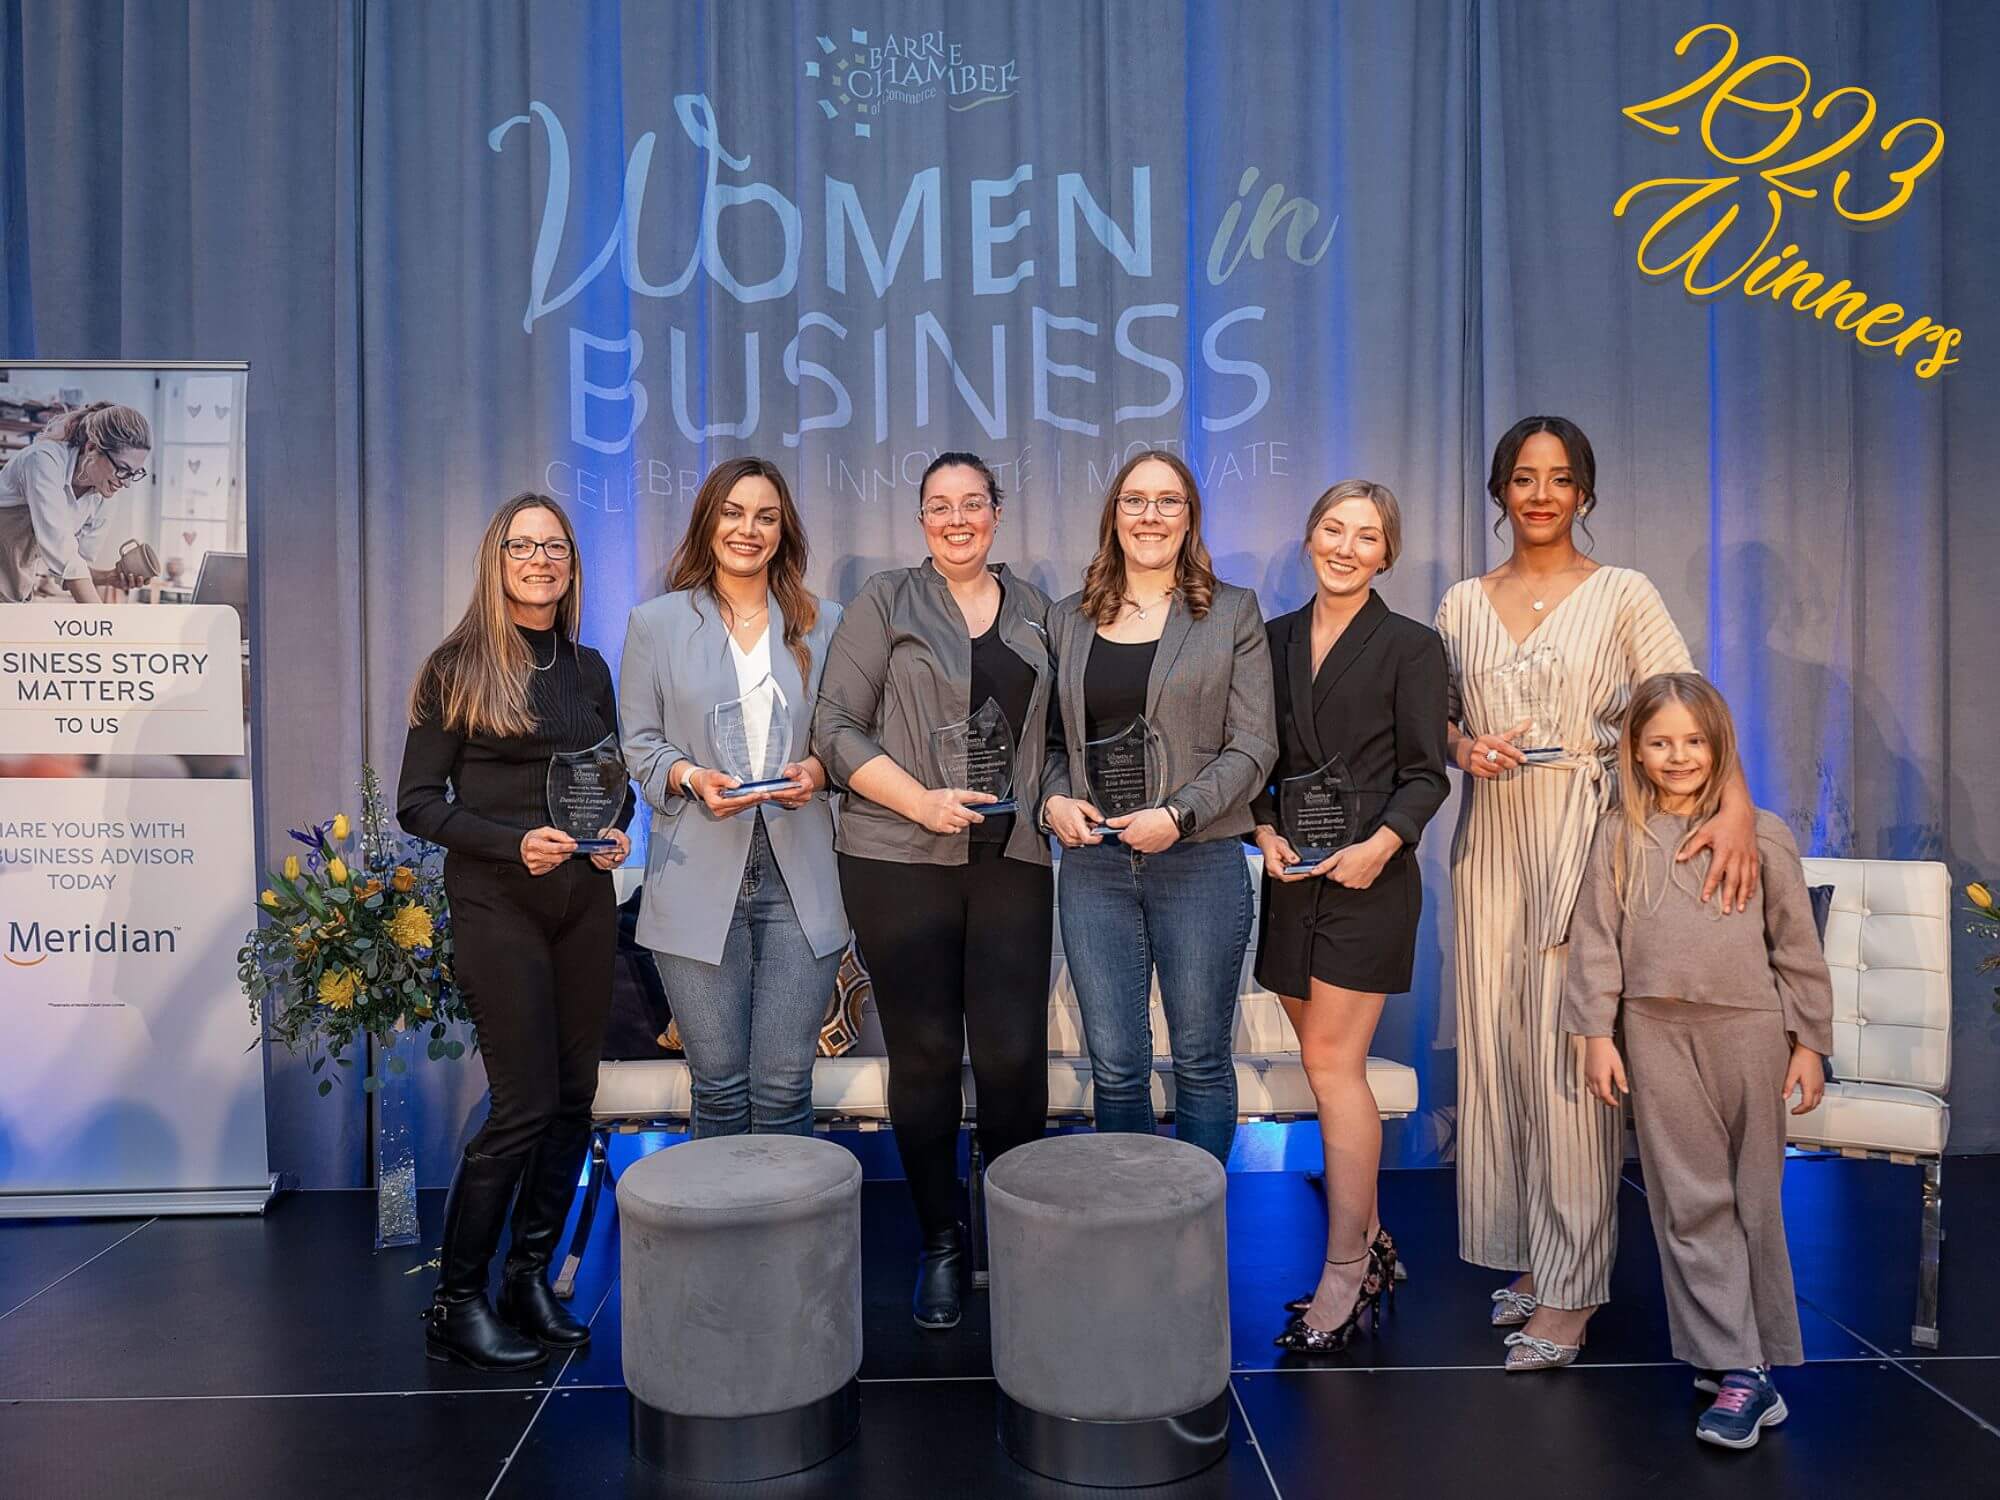 Winners of the 2023 Women in Business Awards, Barrie Chamber of Commerce
Intrapreneur  Cassie Frengopoulos, Gerrits Engineering Limited
Sponsored by Grant Thornton  Young Entrepreneur  Rebecca Bartley, Trooper Pet Veterinary Nursing
Sponsored by Invest Barrie  Entrepreneur  Danielle Levangie, Red Barn Event Centre
Sponsored by Meridian Credit Union  Heart &amp; Soul  Candice Thomas, Evergreen Wellness
Sponsored by Downtown Barrie  Women in Trade  Lisa Bertram, Bertram Construction Ltd
Sponsored by Georgian College  Visionary  Brittany Gallagher, Splash On Water Parks
Sponsored by Tempo Flexible Packaging